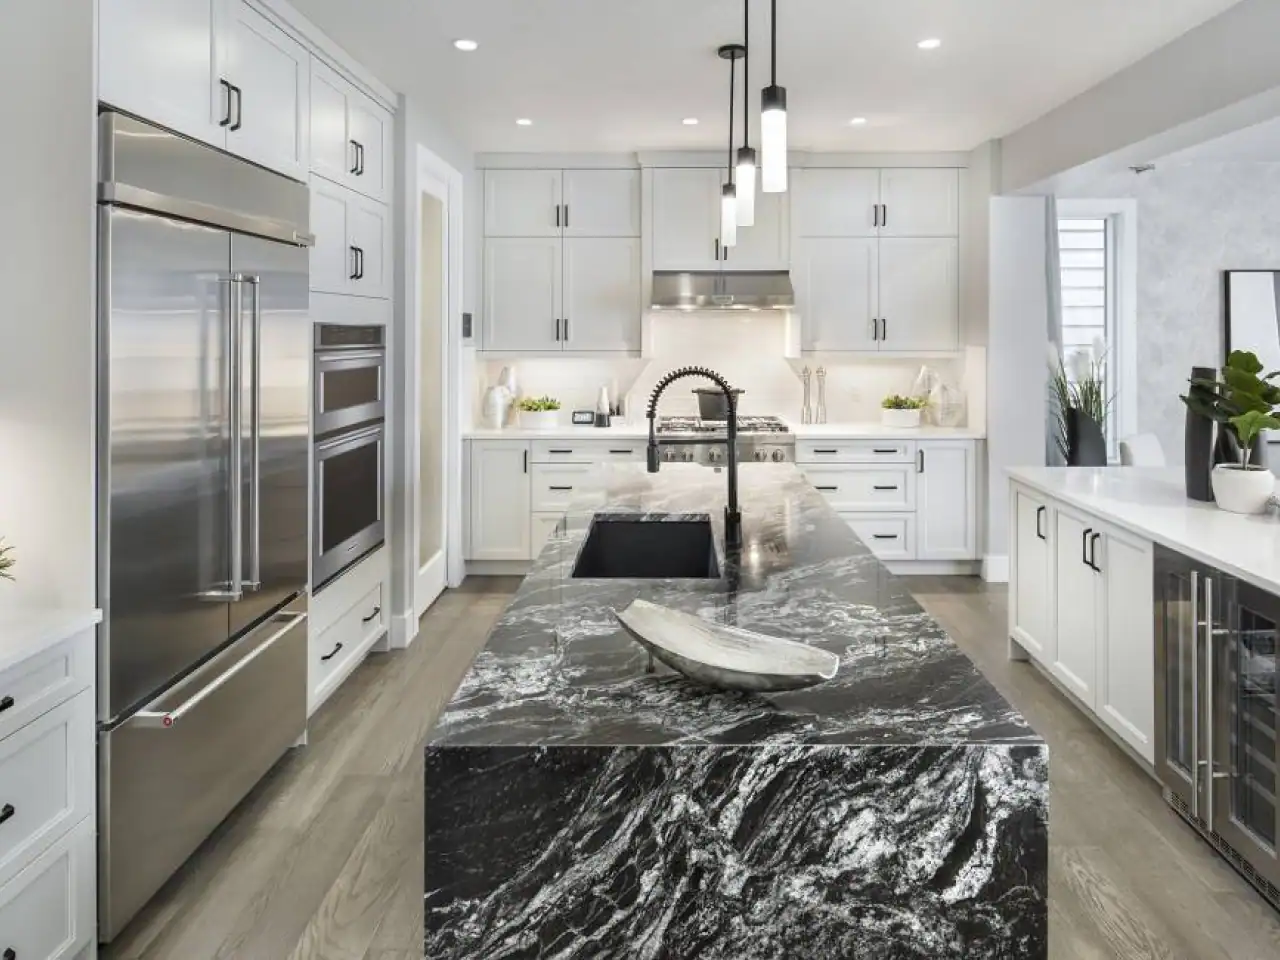 Newly designed kitchen featuring modern appliances, sleek cabinetry, and pristine countertops, embodying a fresh and contemporary culinary space.